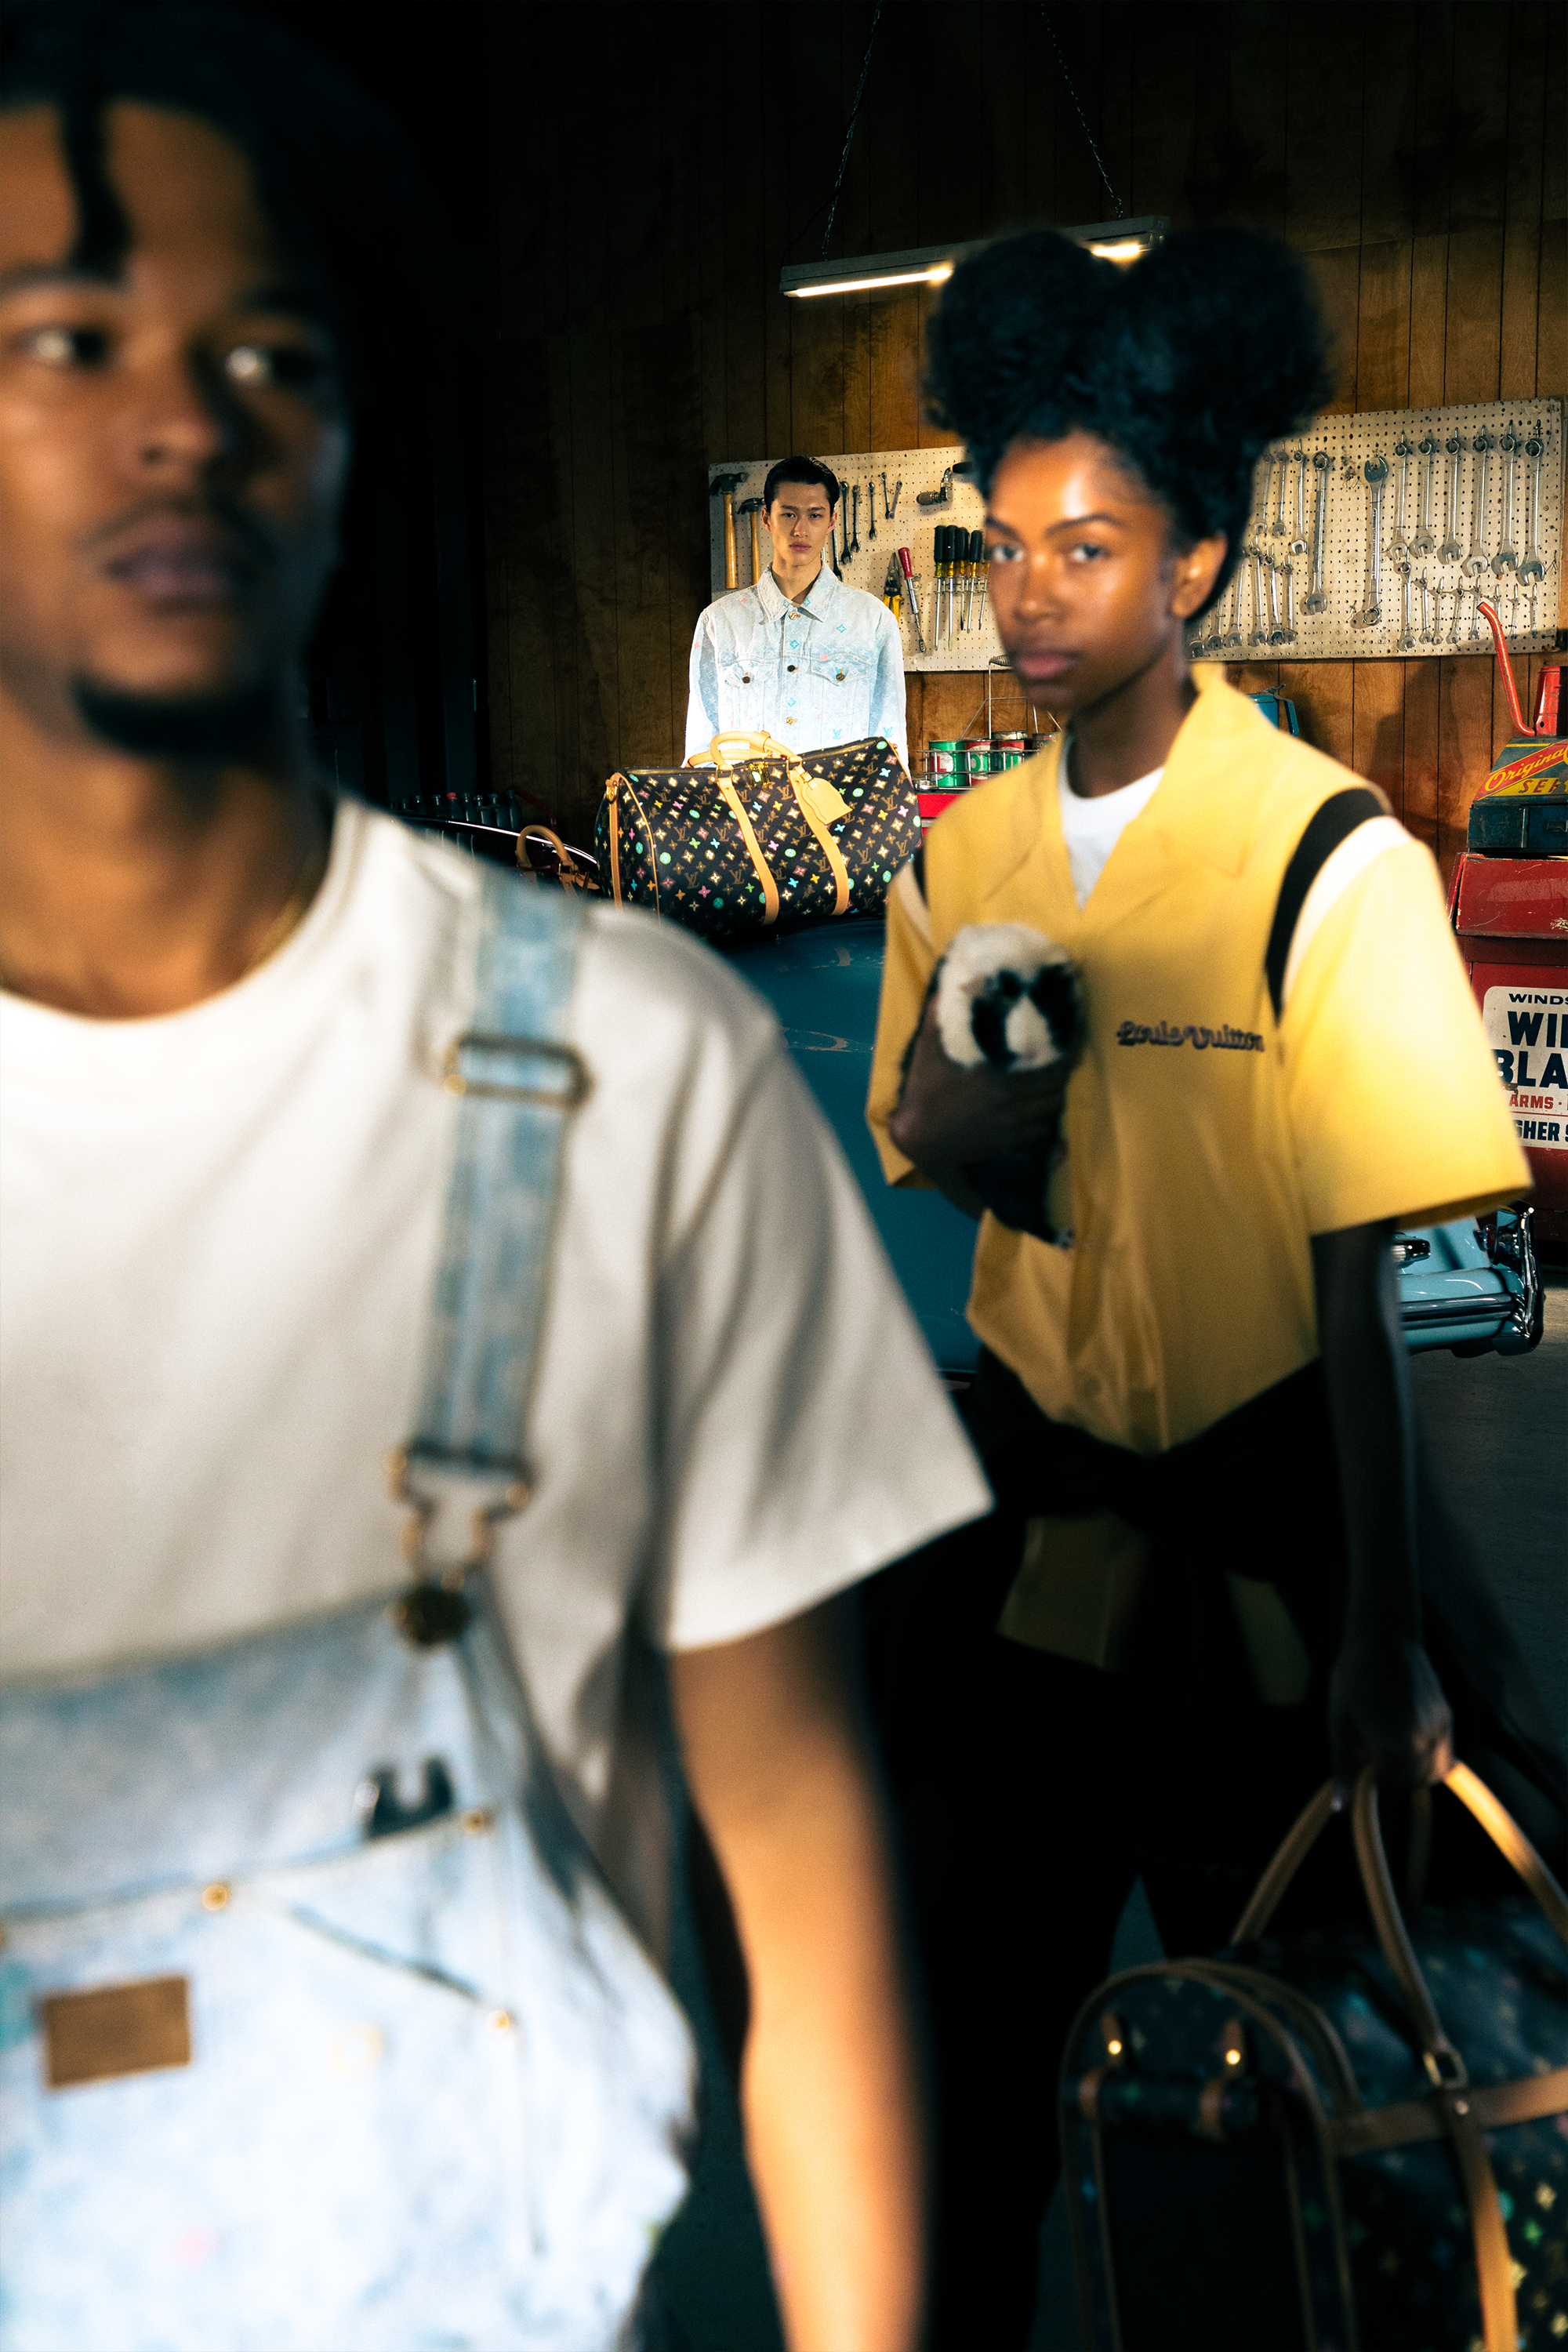 Foreground: Person in overalls with focus on logo. Background: Two people, one holding LV bag